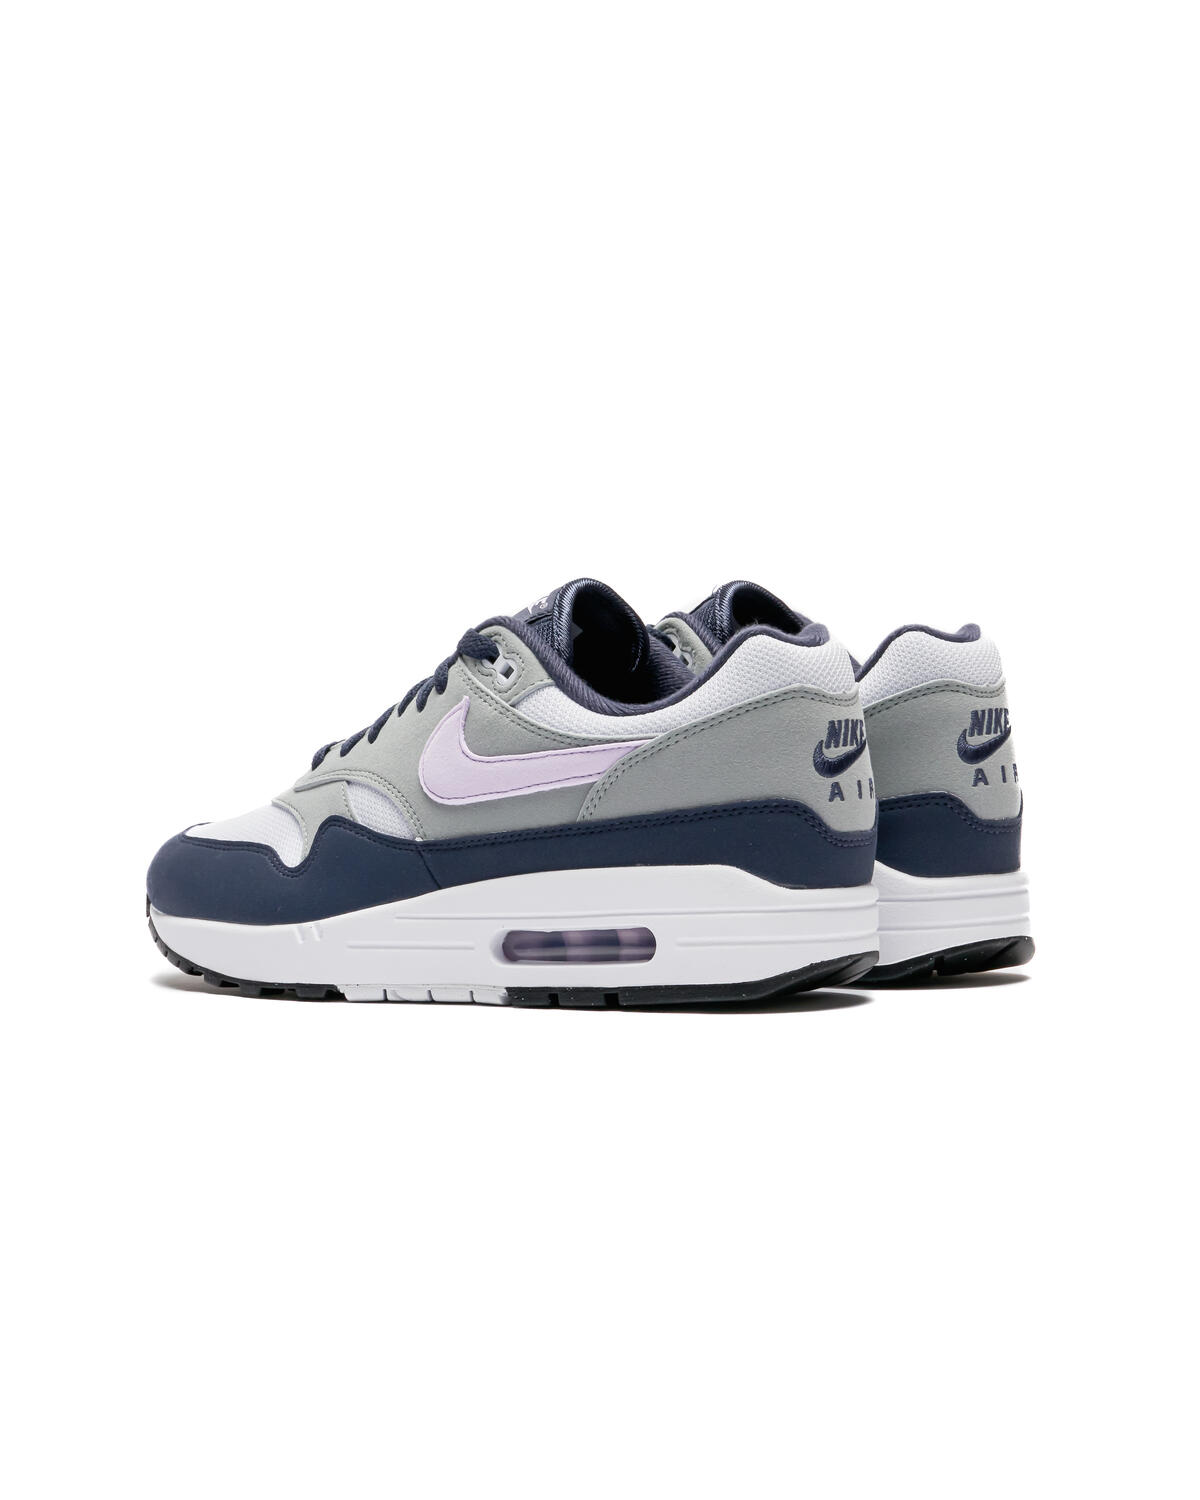 Available Now // Nike Air Max 1 Thunder Blue